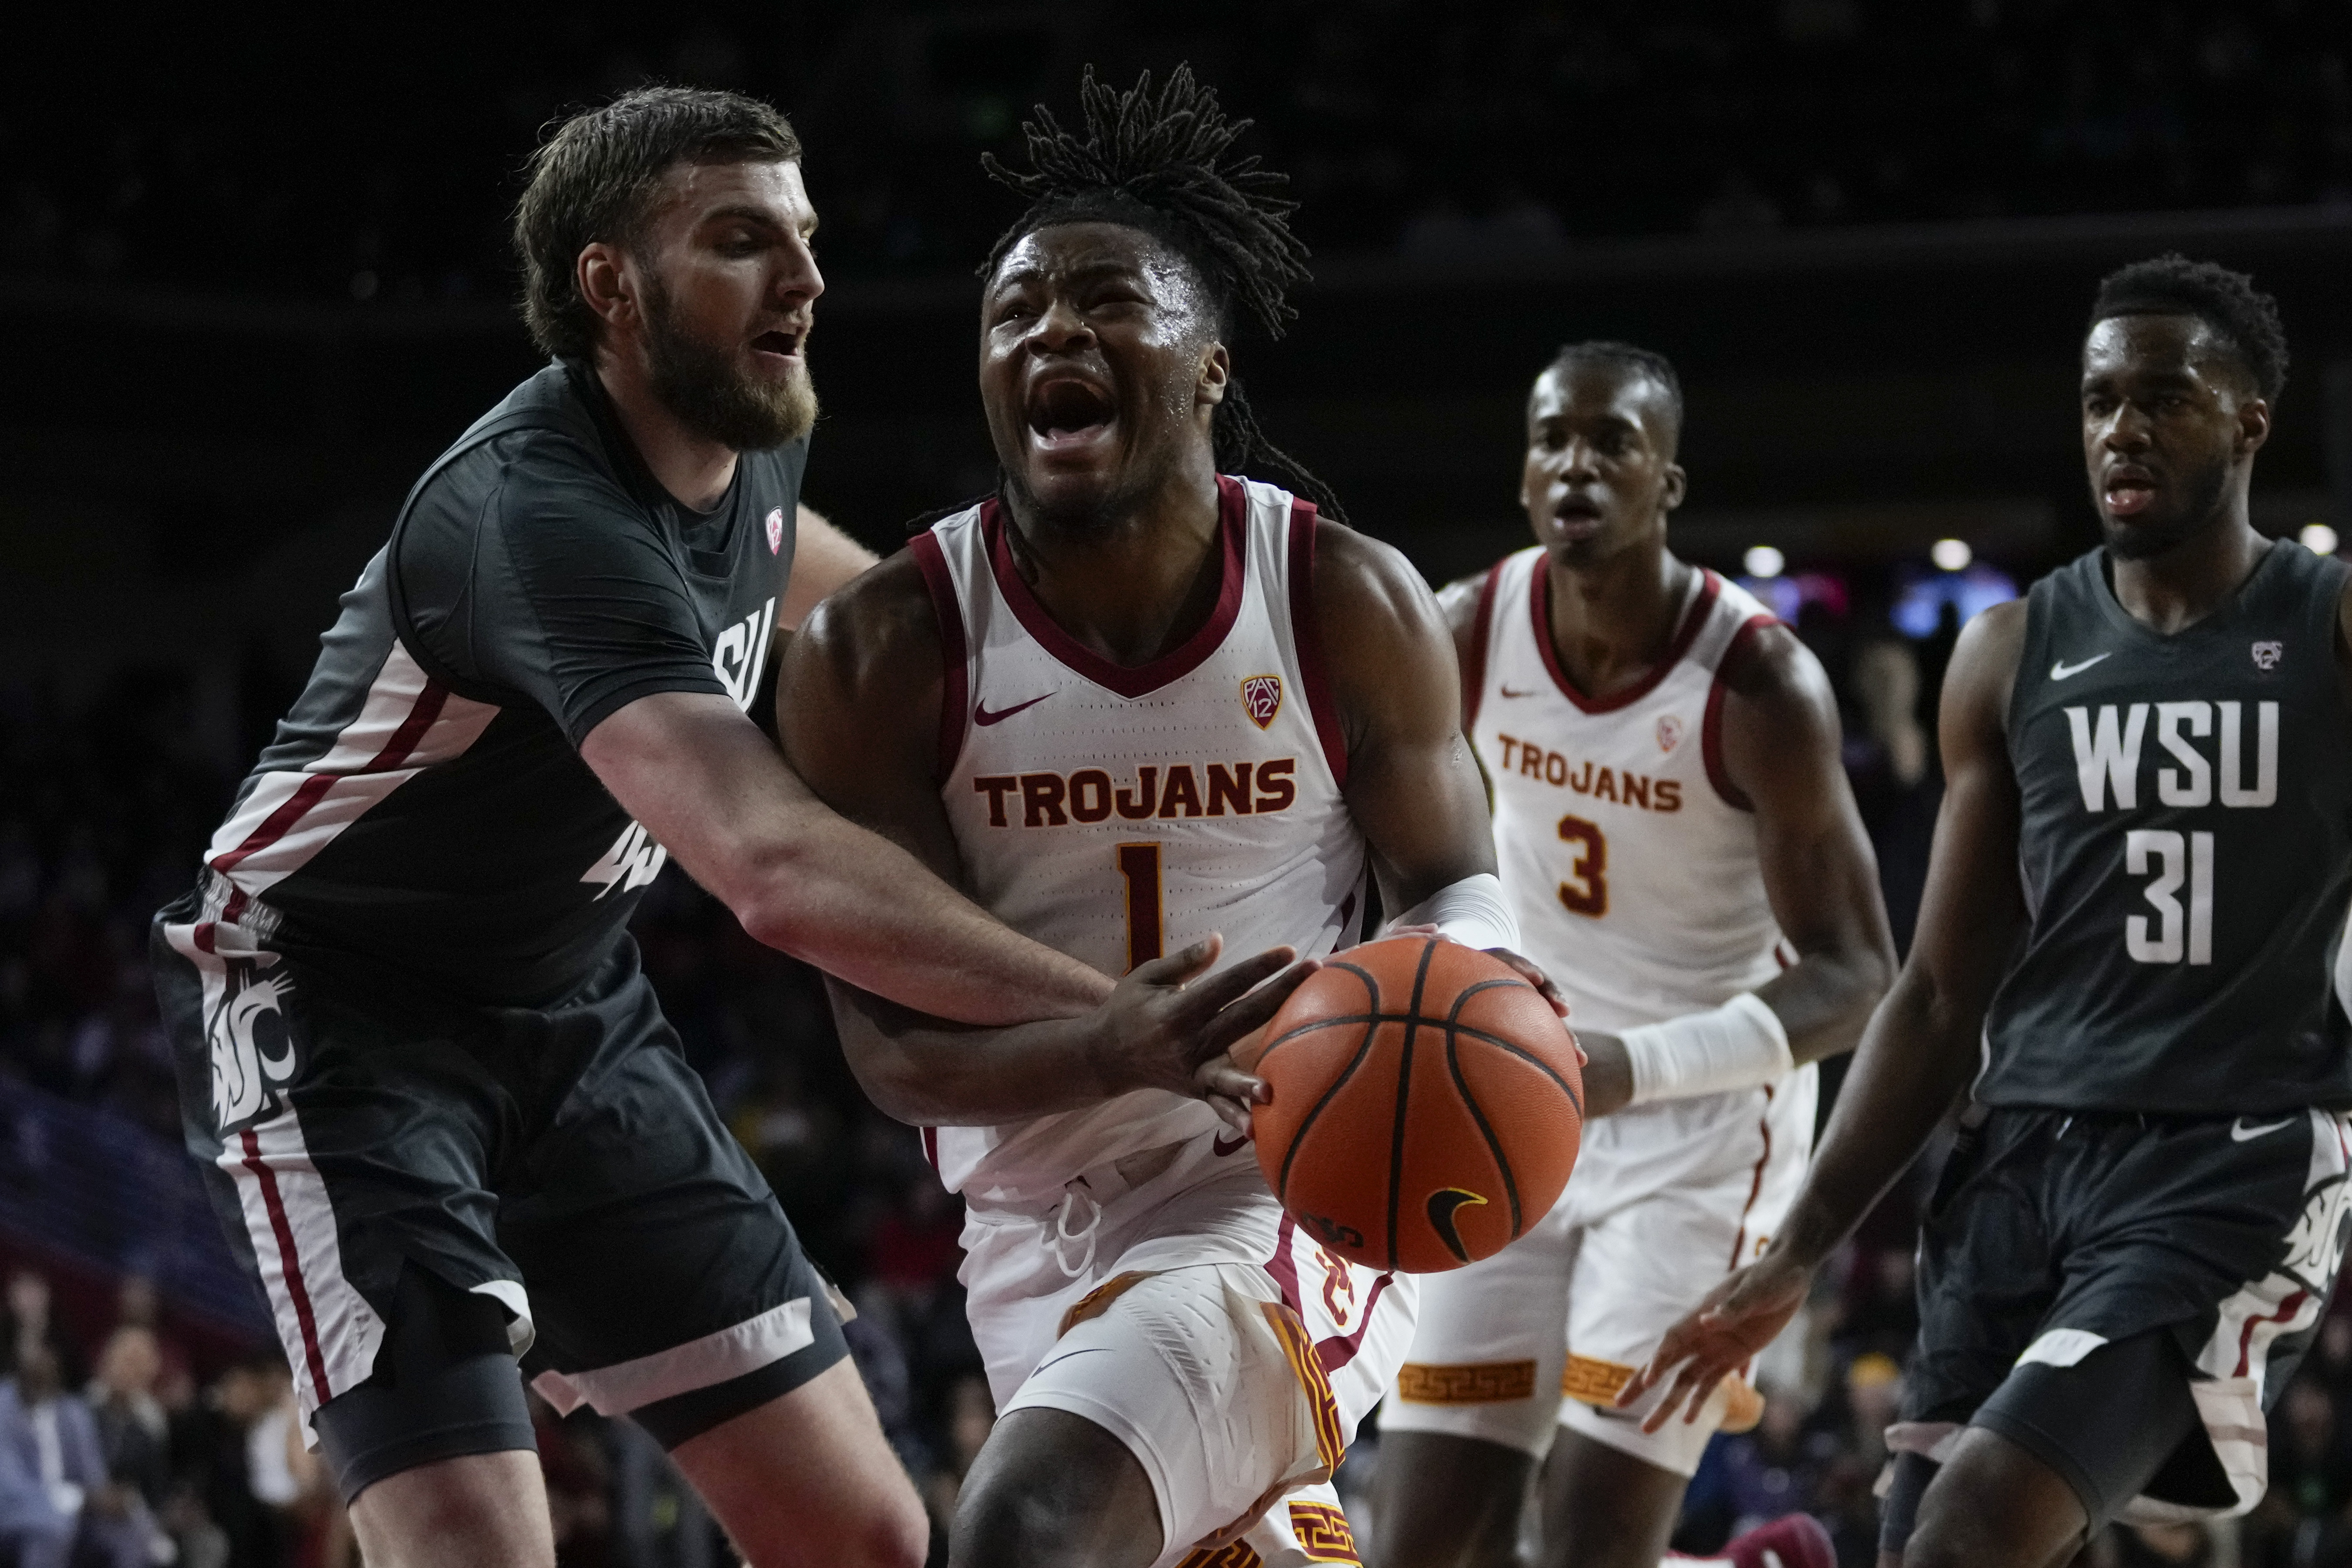 USC guard Isaiah Collier to miss at least a month with a hand